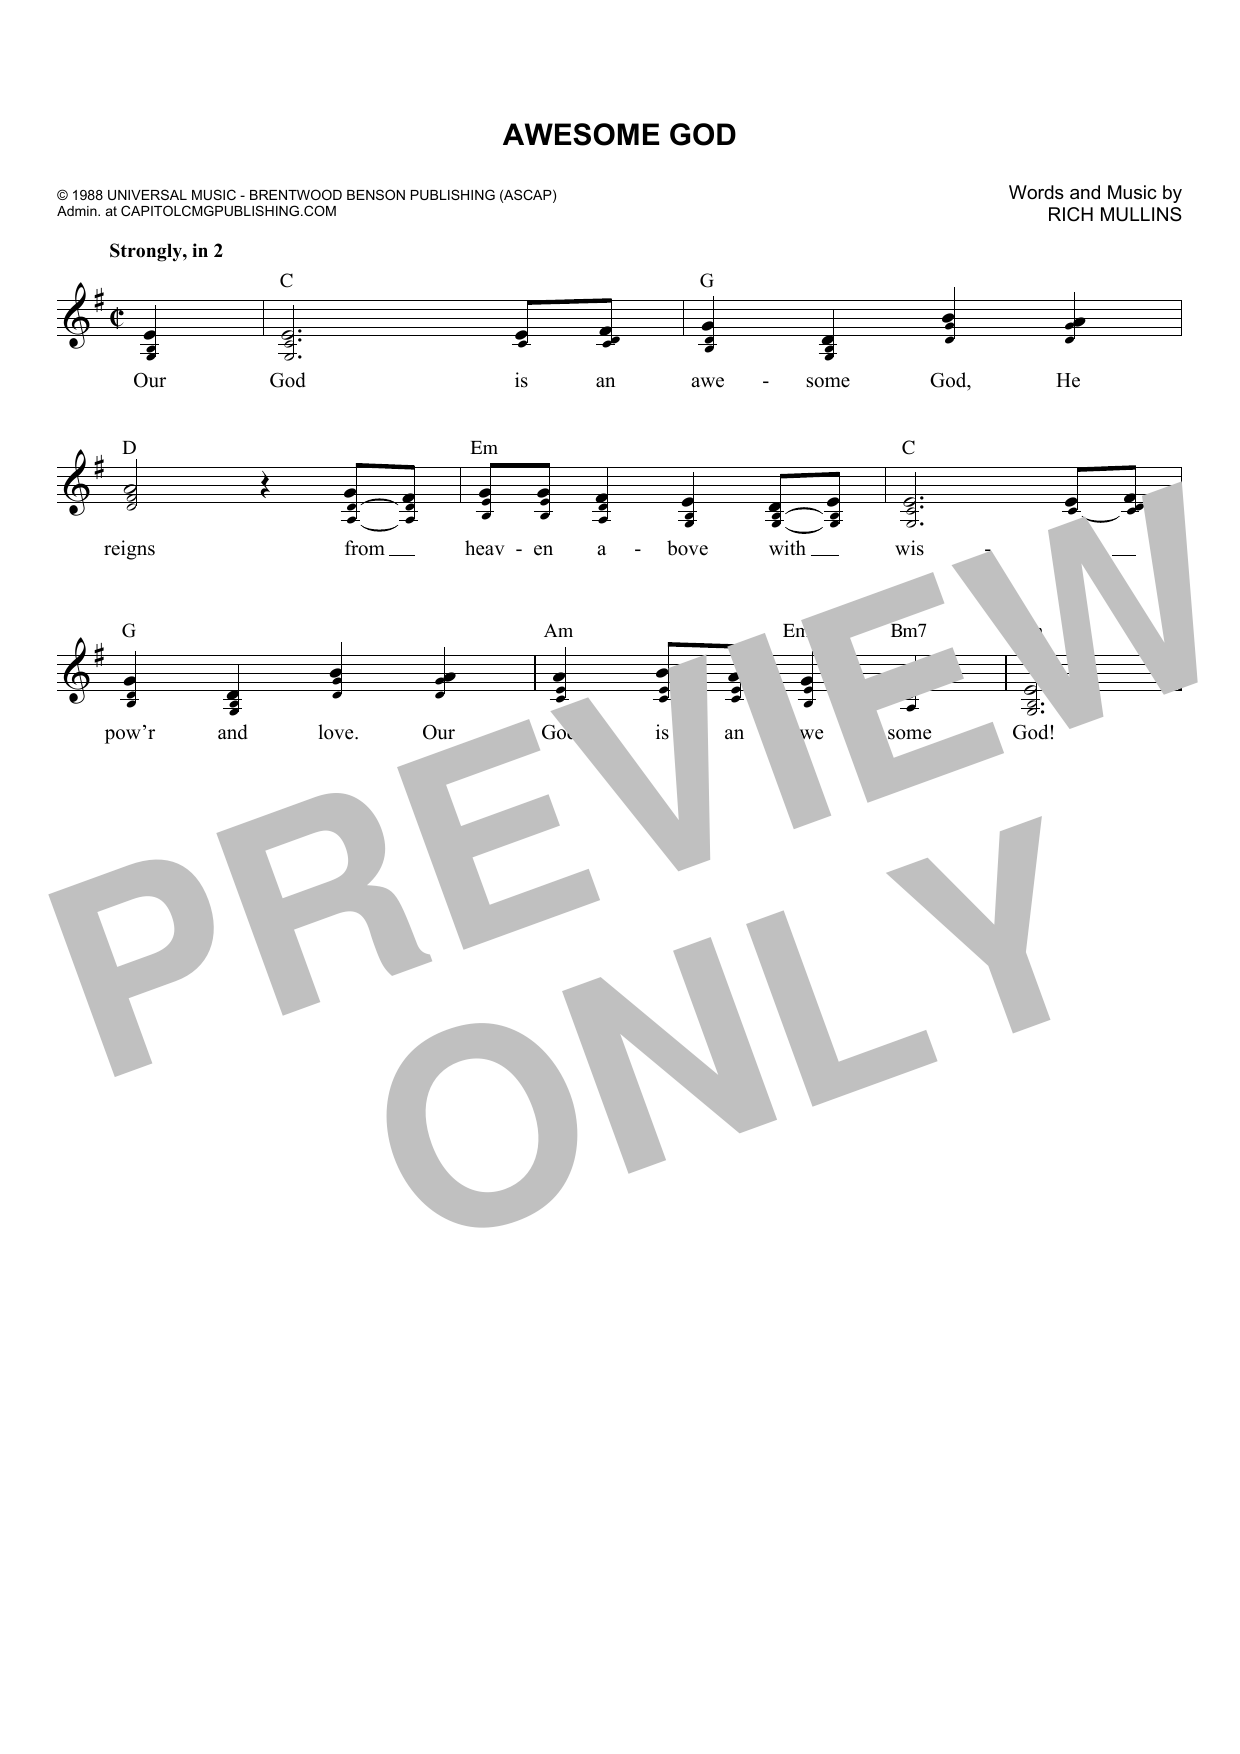 Download Rich Mullins Awesome God Sheet Music